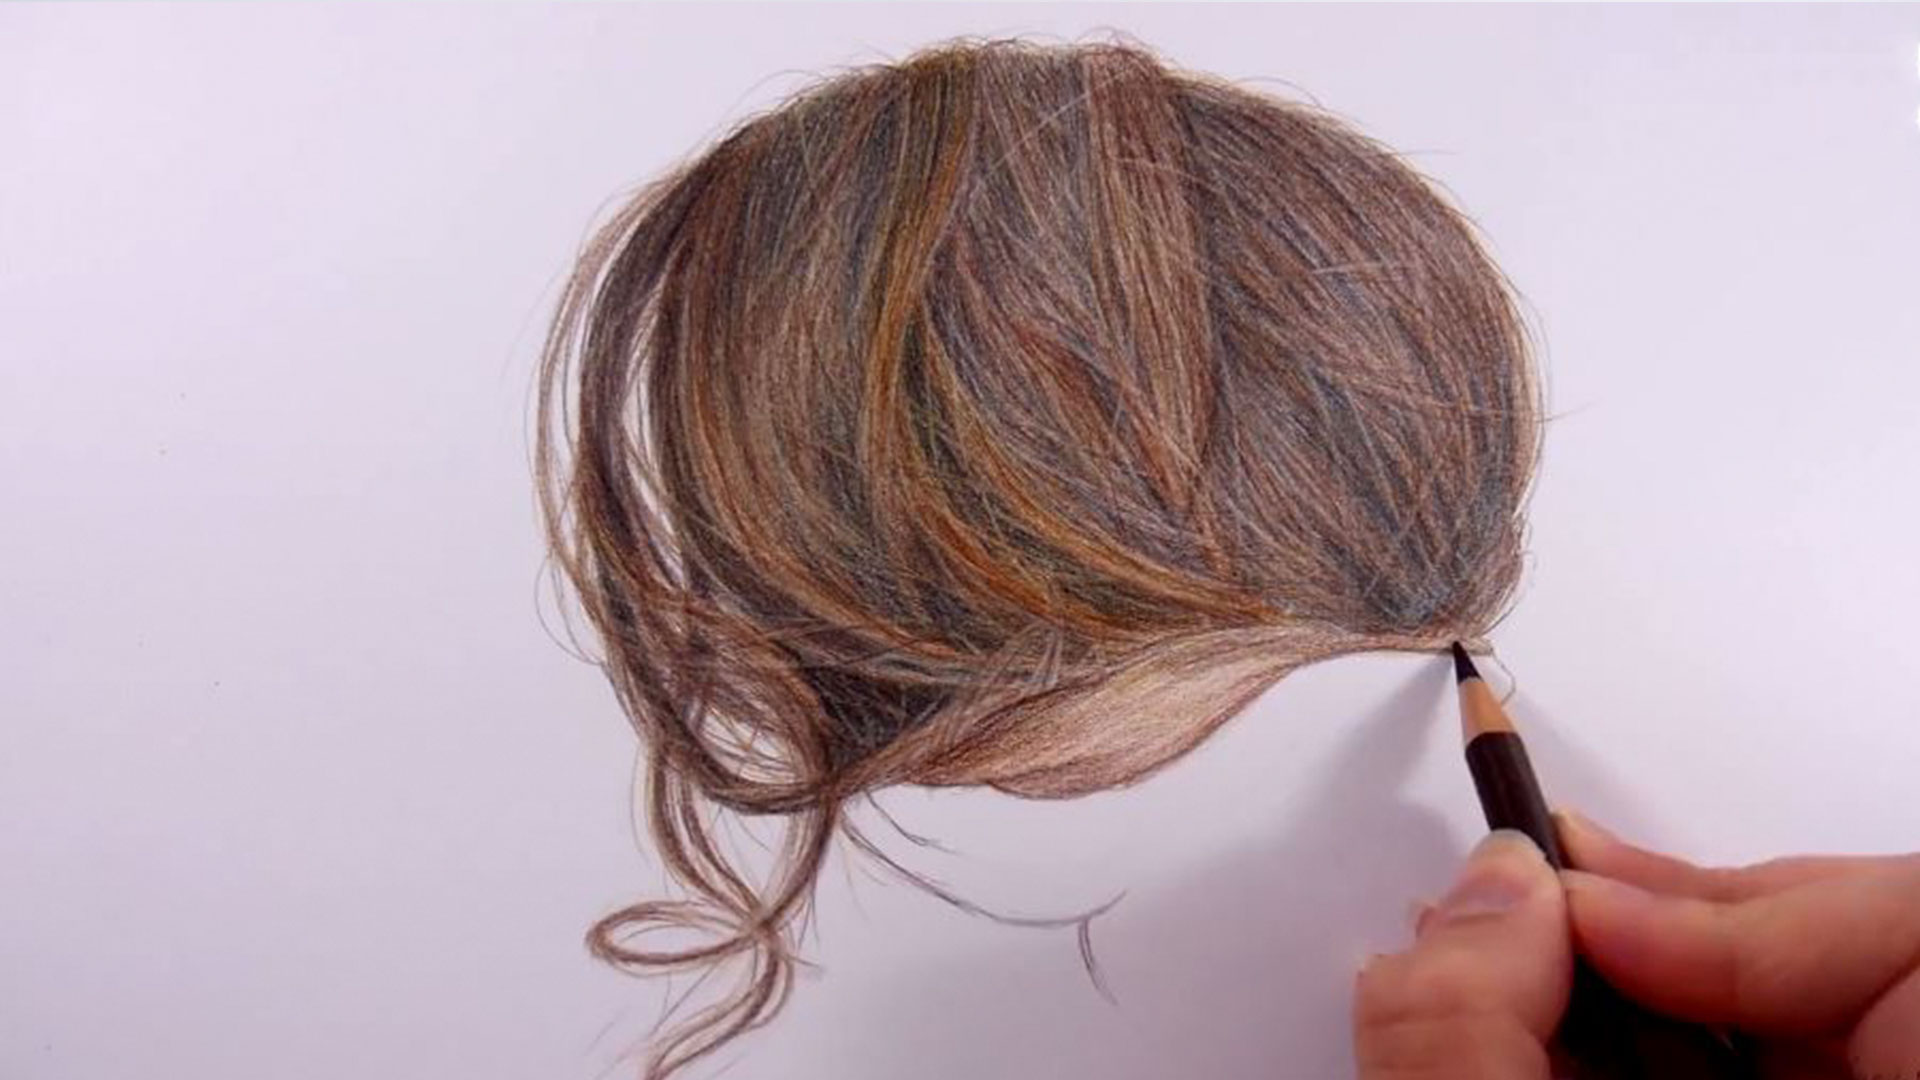 Unbelievably Realistic Hair Drawn Using 8 Colored Pencils | Bored Panda